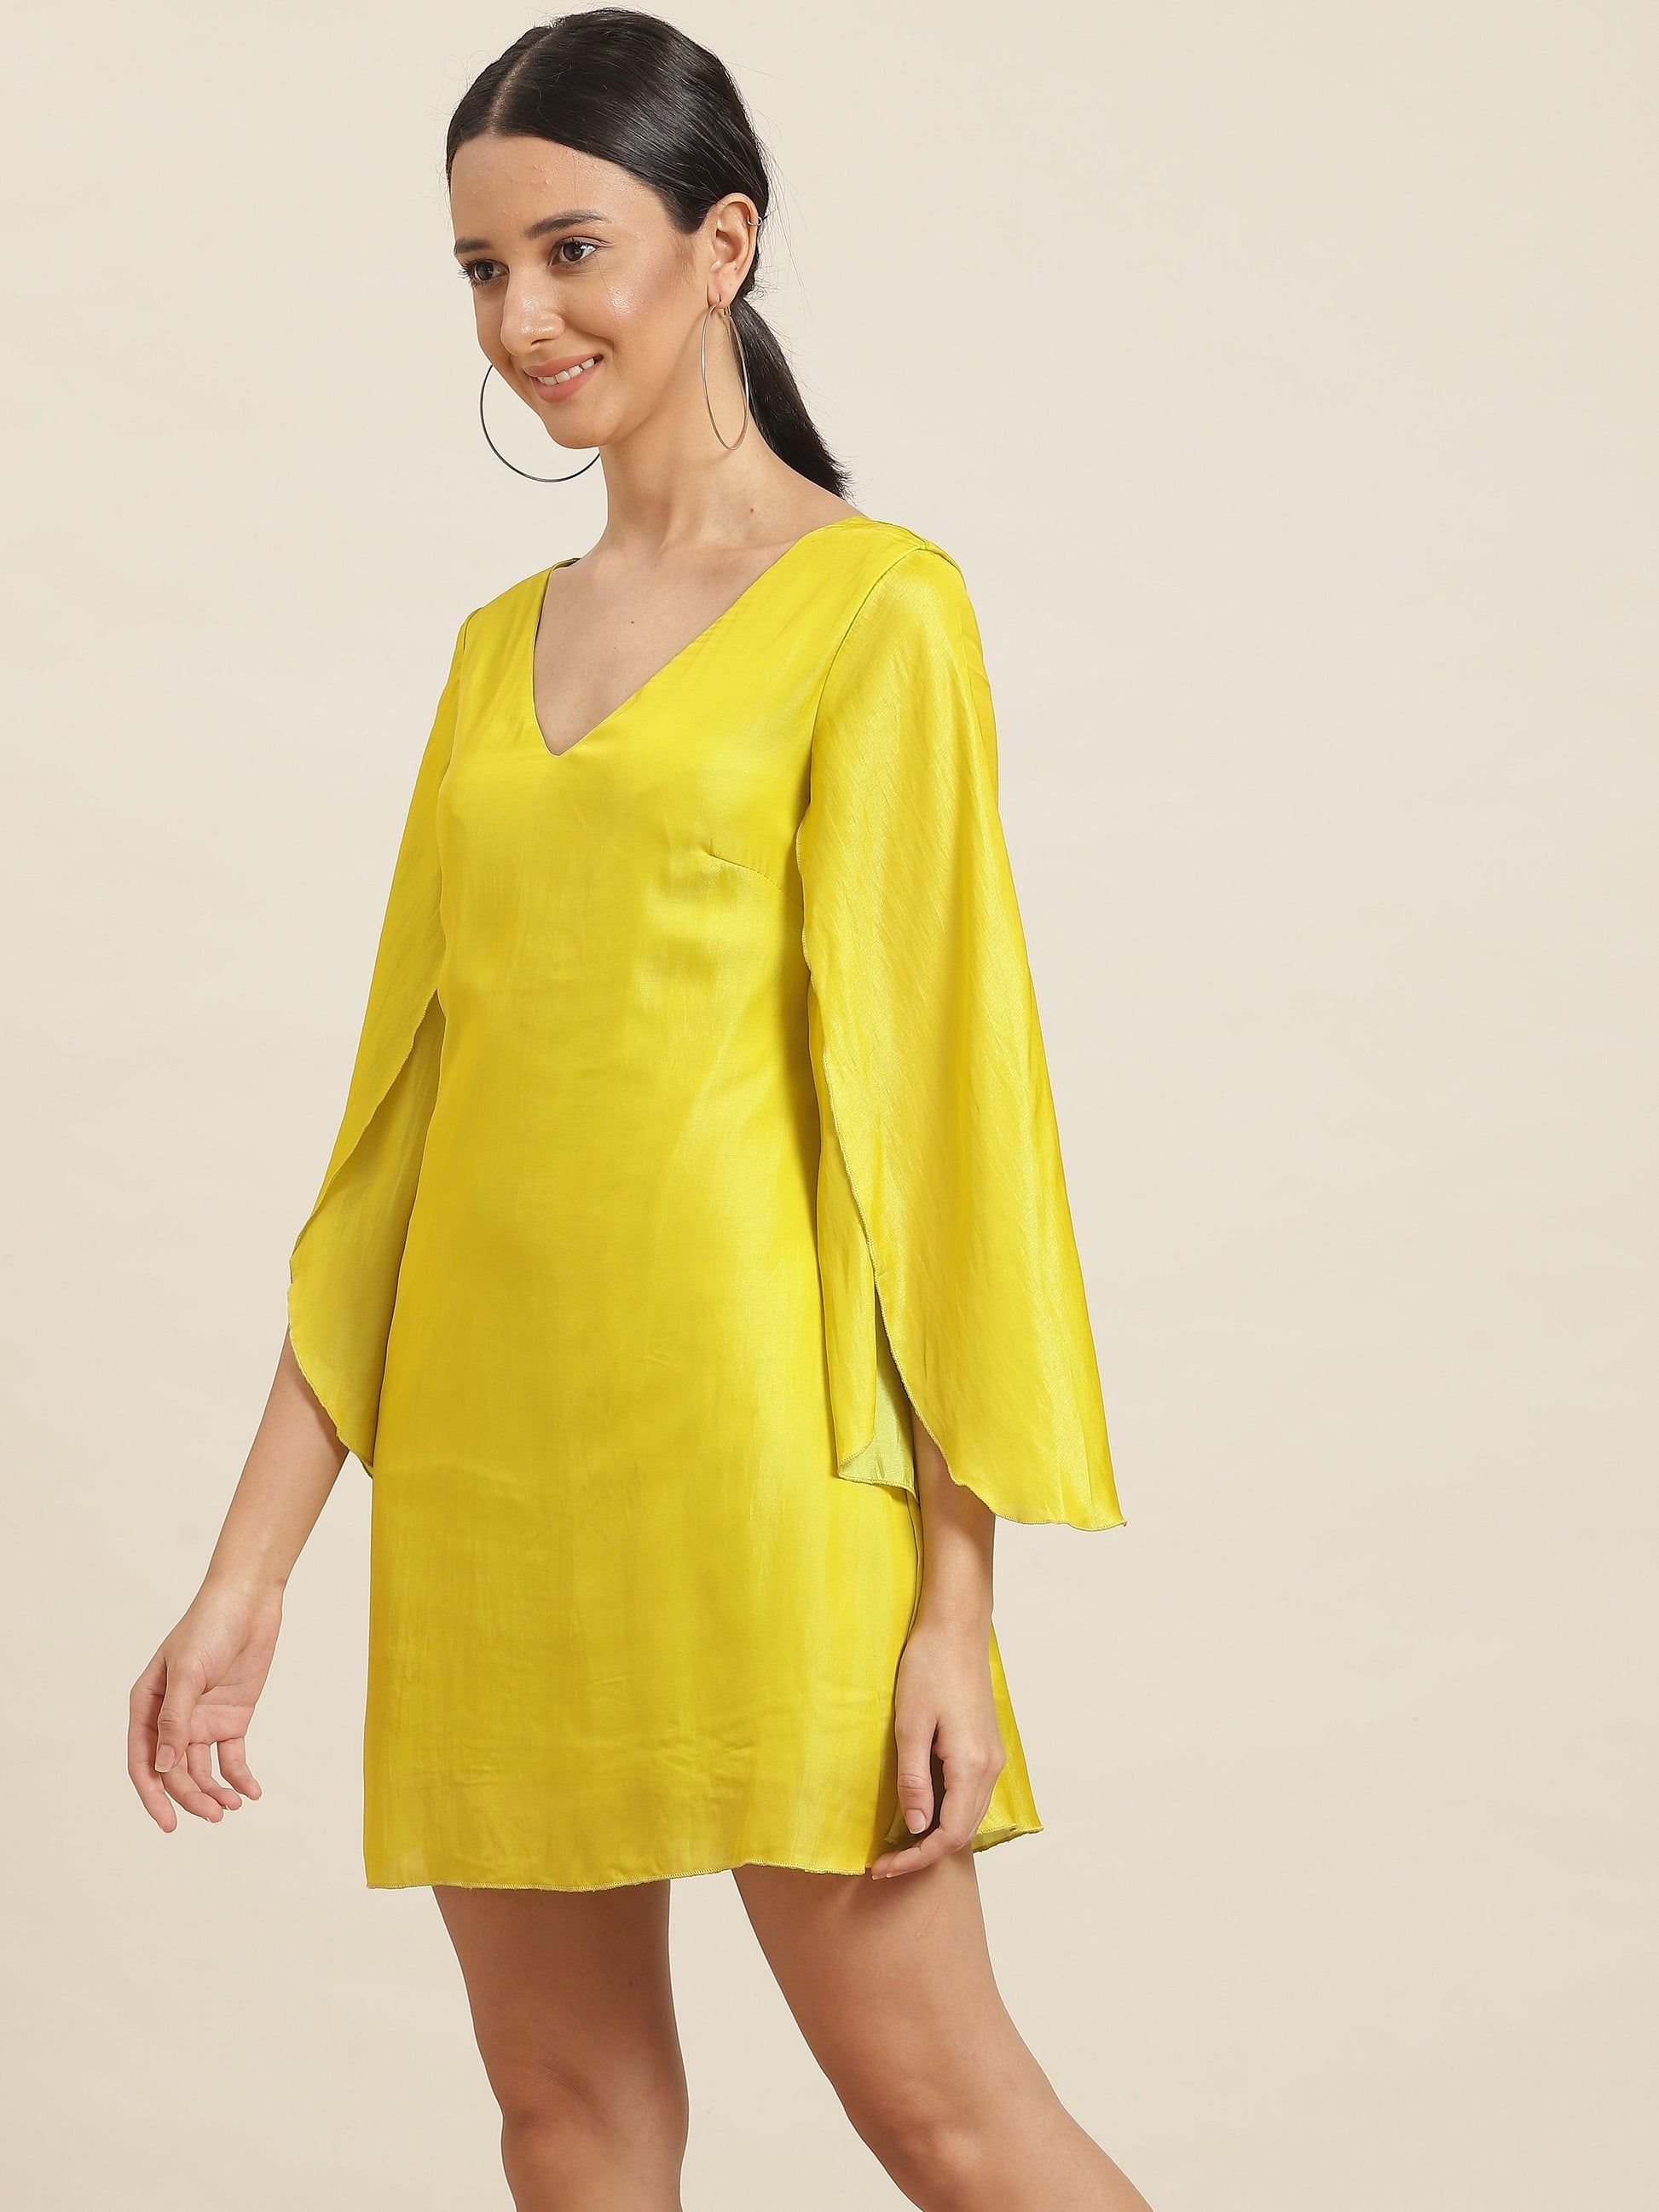 Qurvii Lime Green Silky A Line Dress - Qurvii India